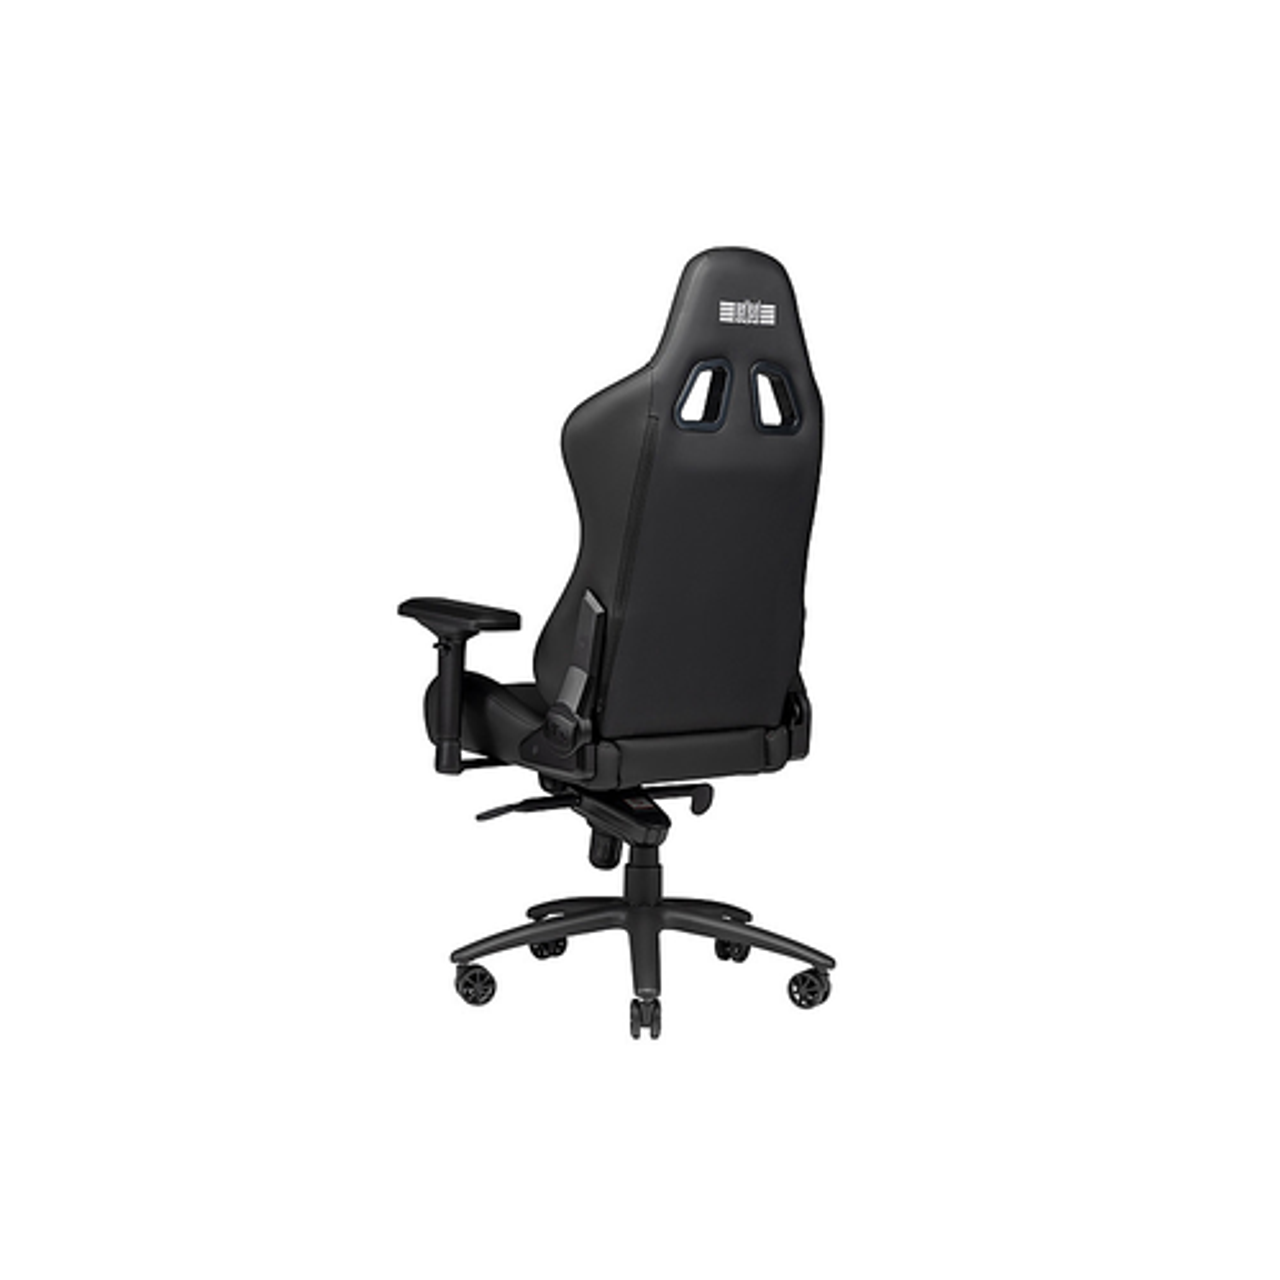 Next Level Racing - Pro Gaming Chair Leather Edition - Black